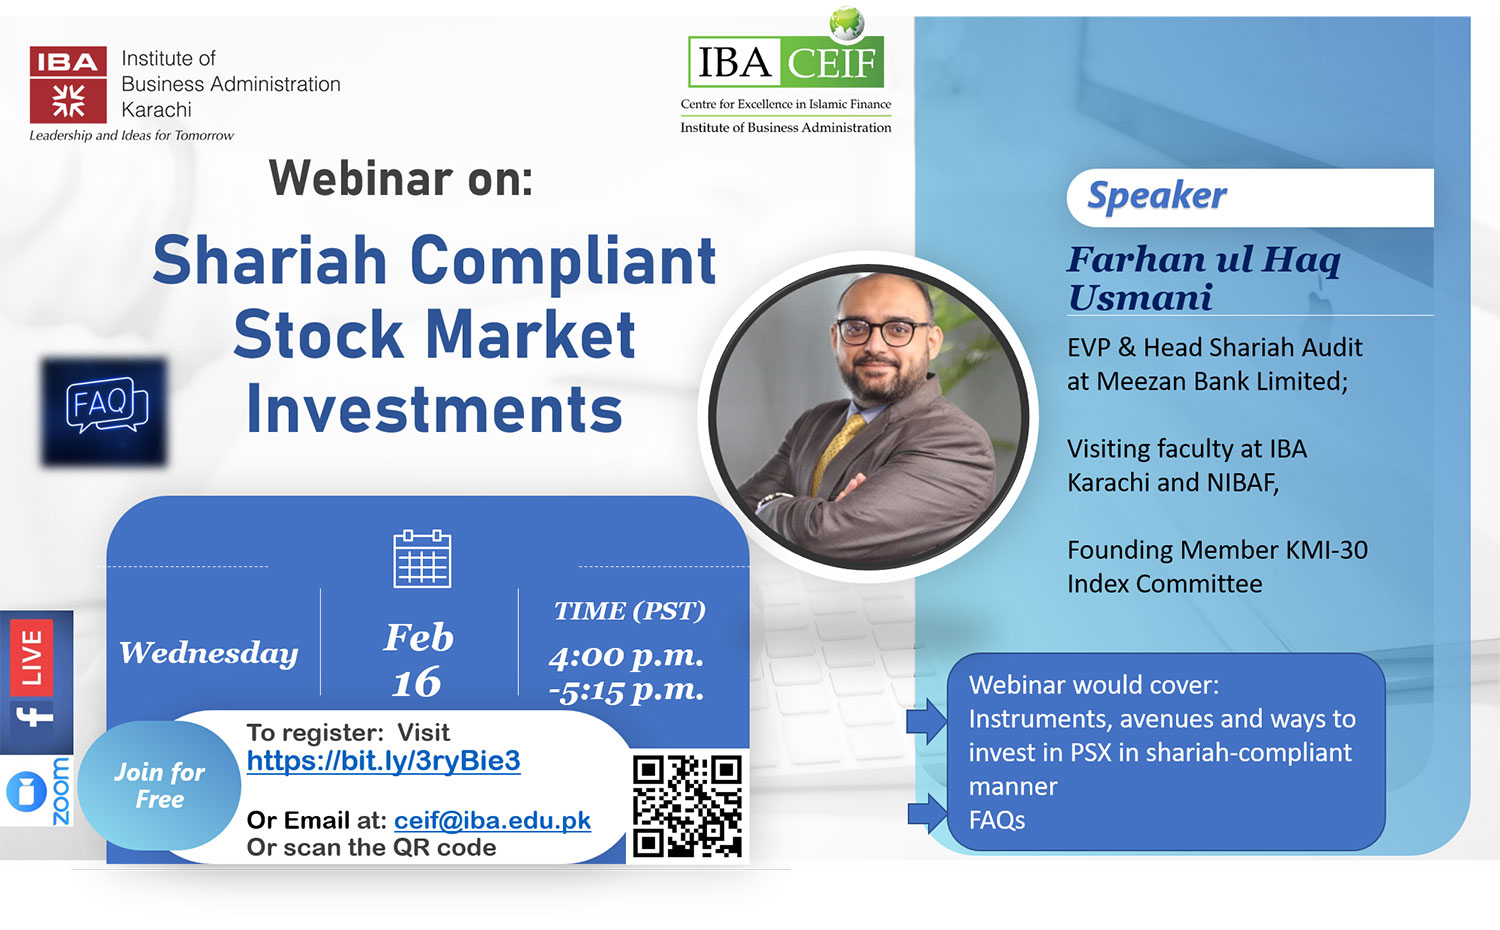 Shariah Compliant stock market Investments